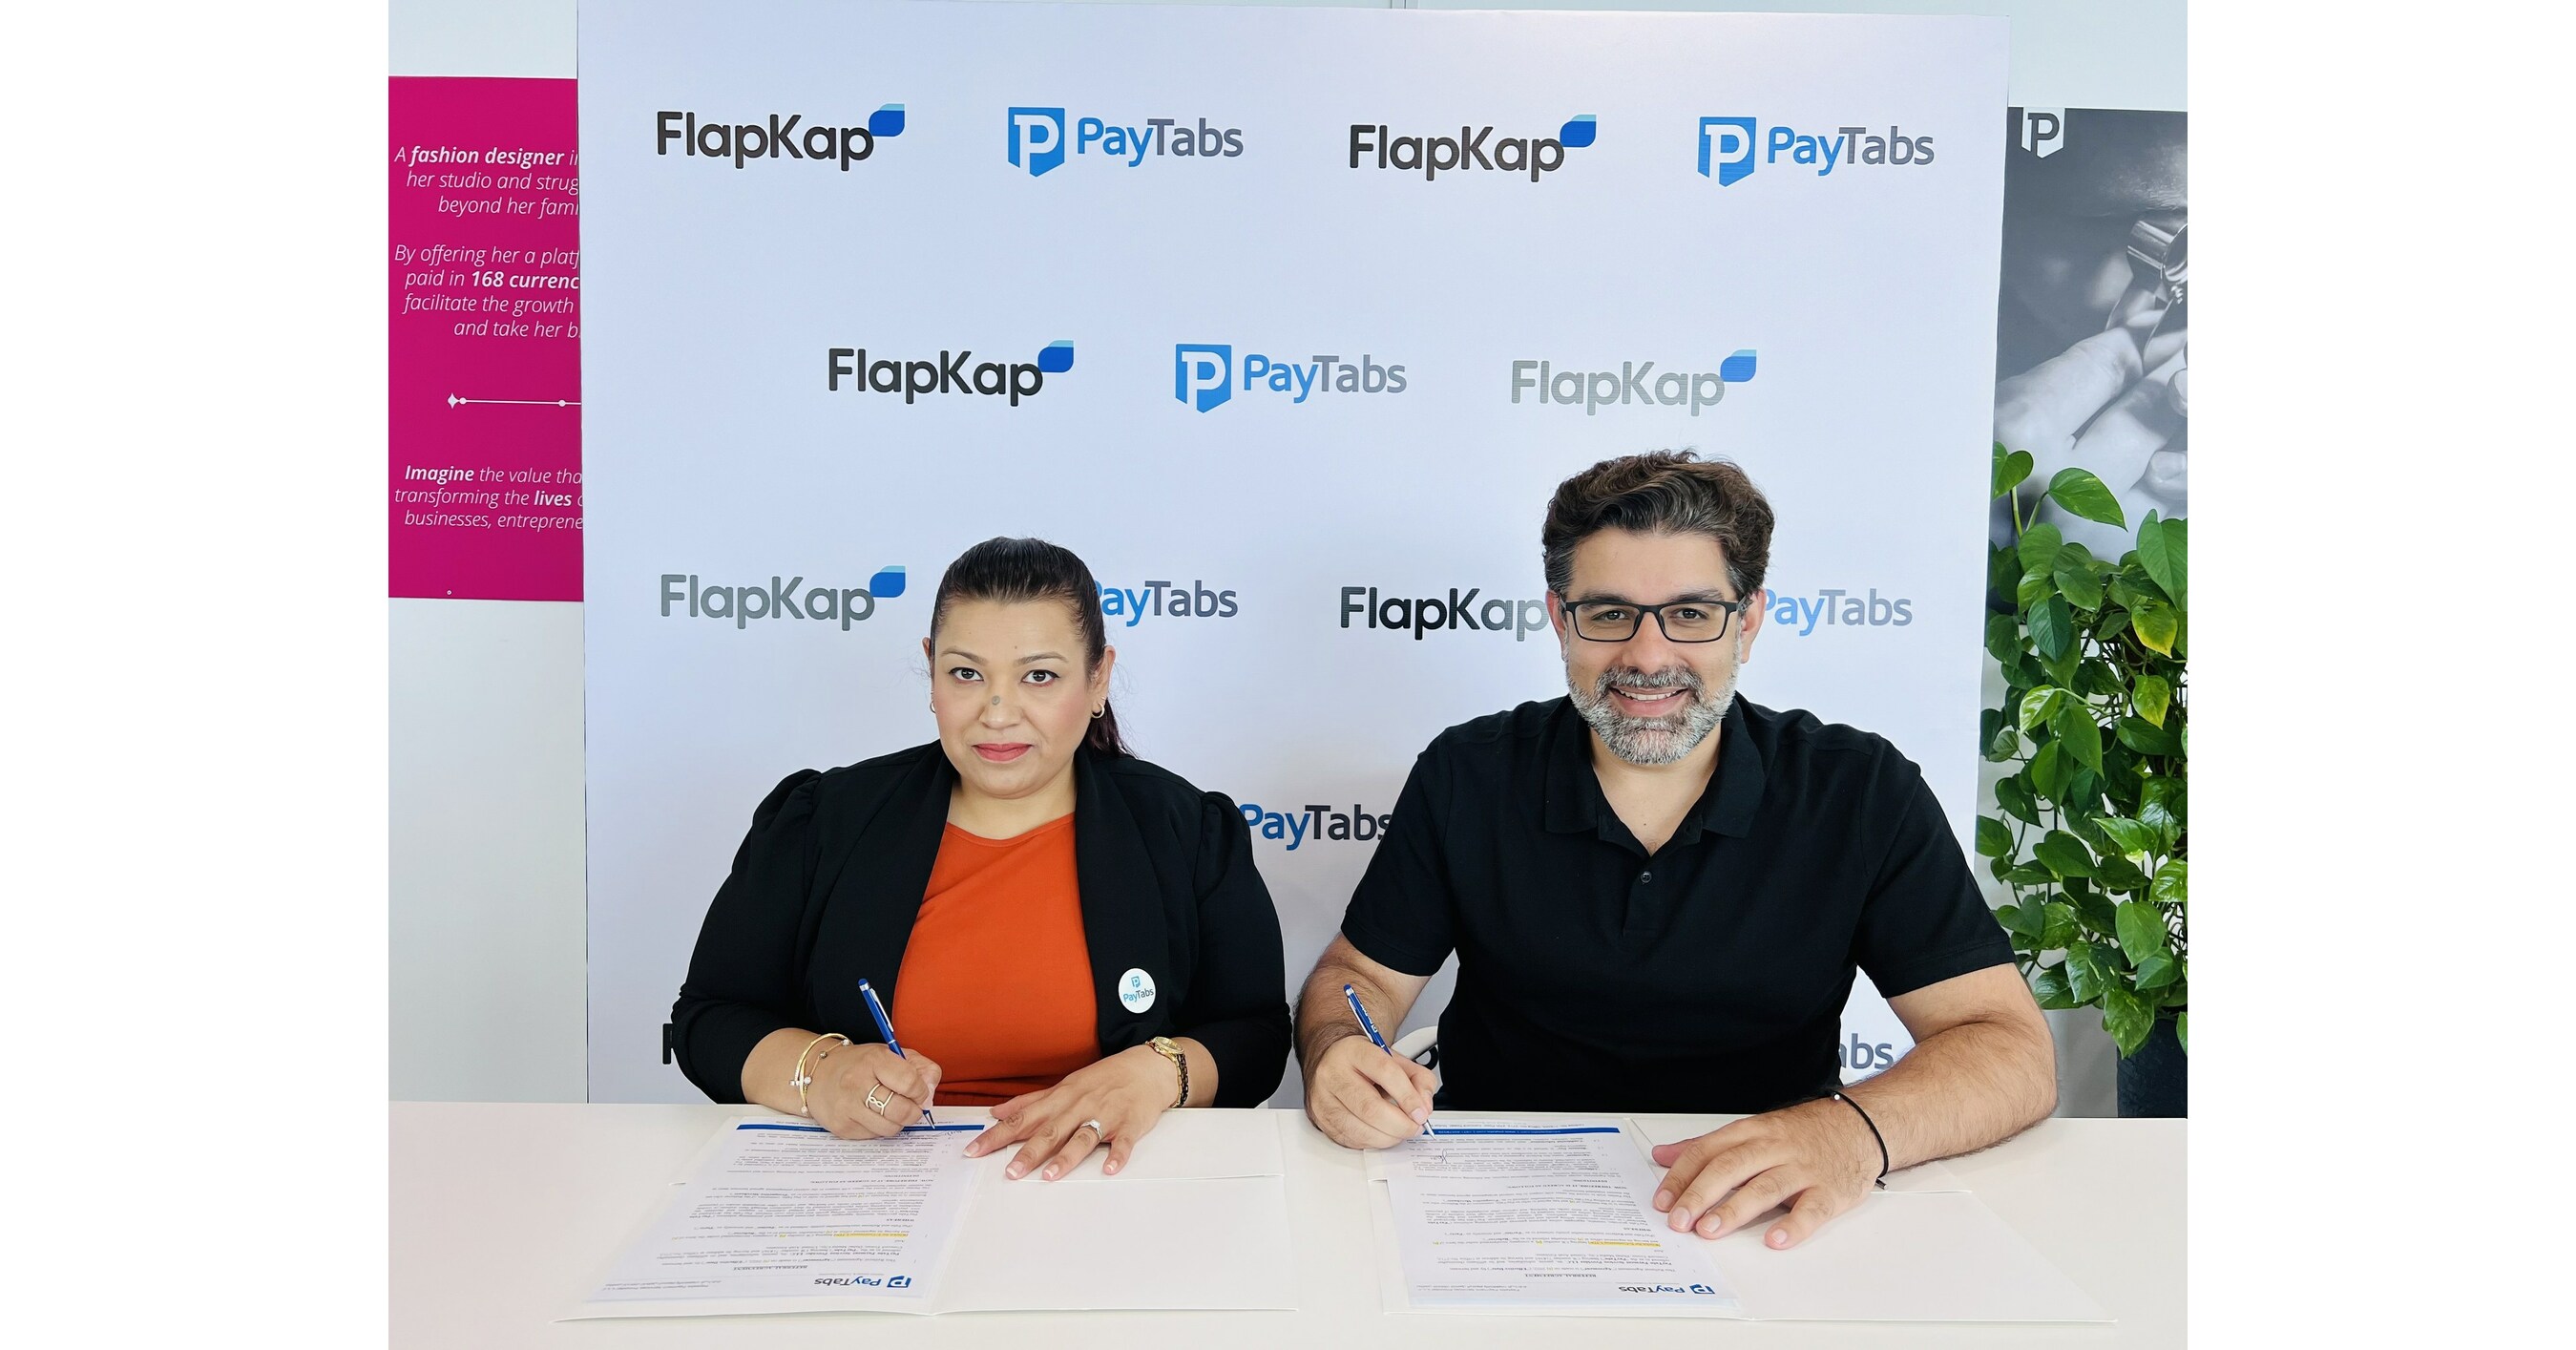 FinTech firms PayTabs and FlapKap partner to ‘superpower’ UAE e-commerce brands.